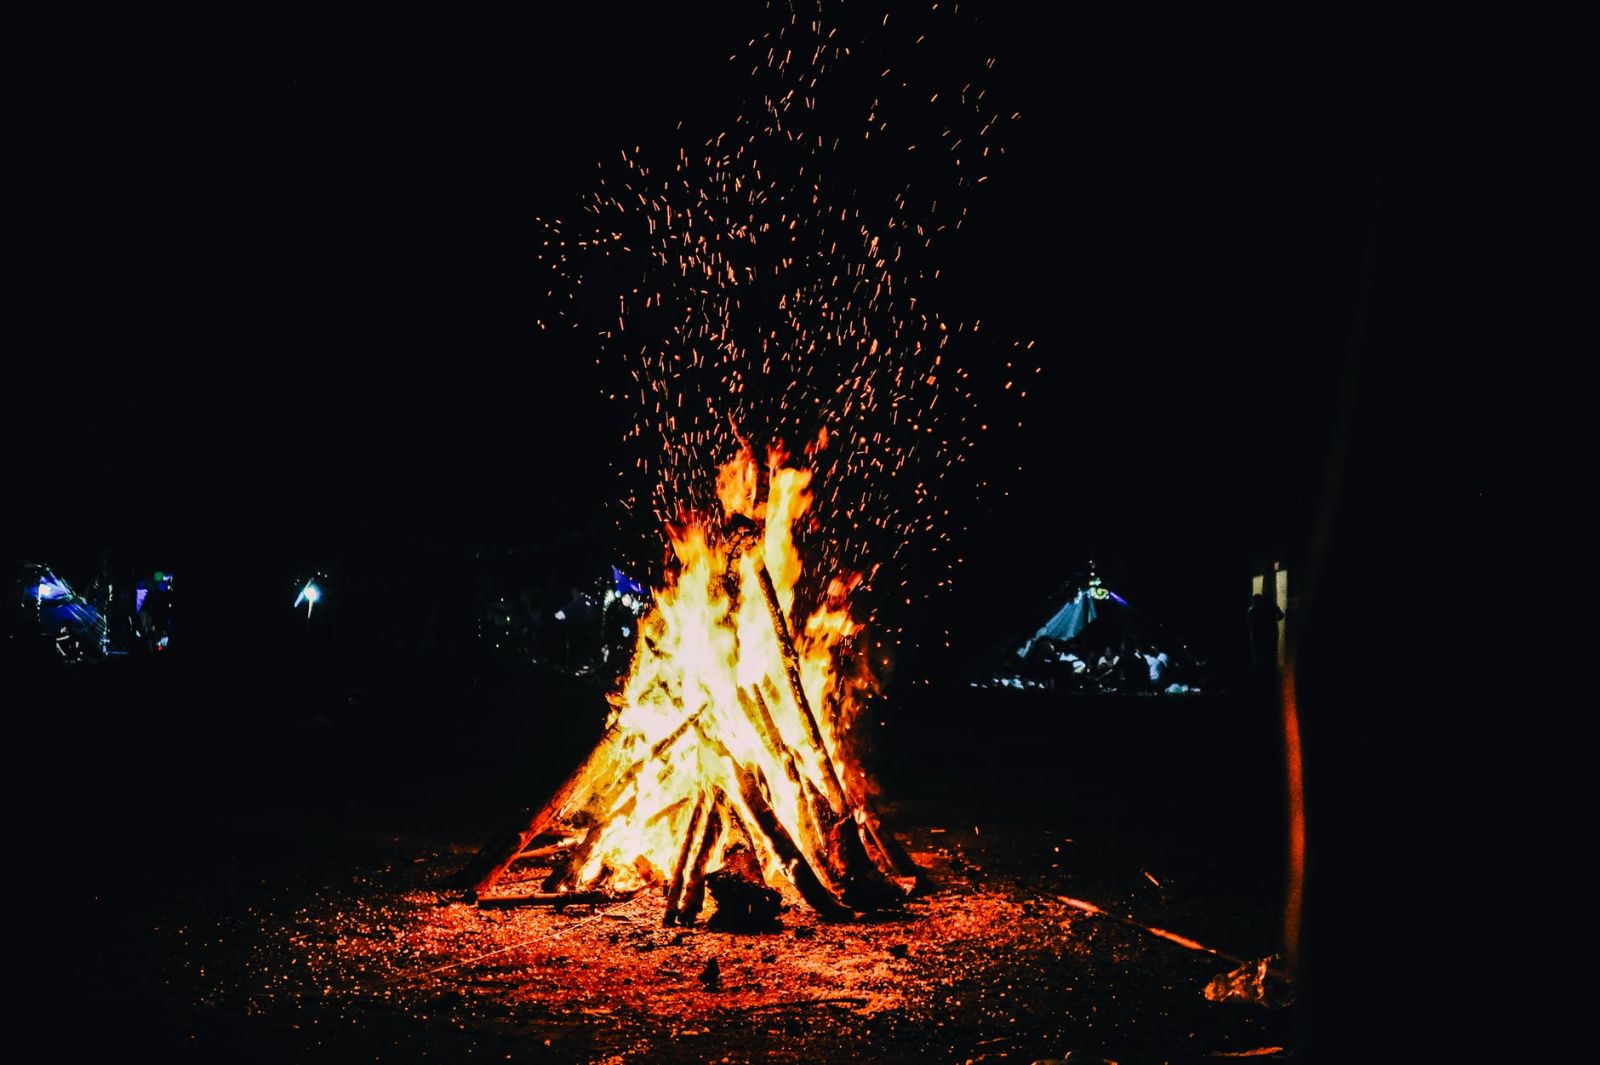 This is image shows a campfire